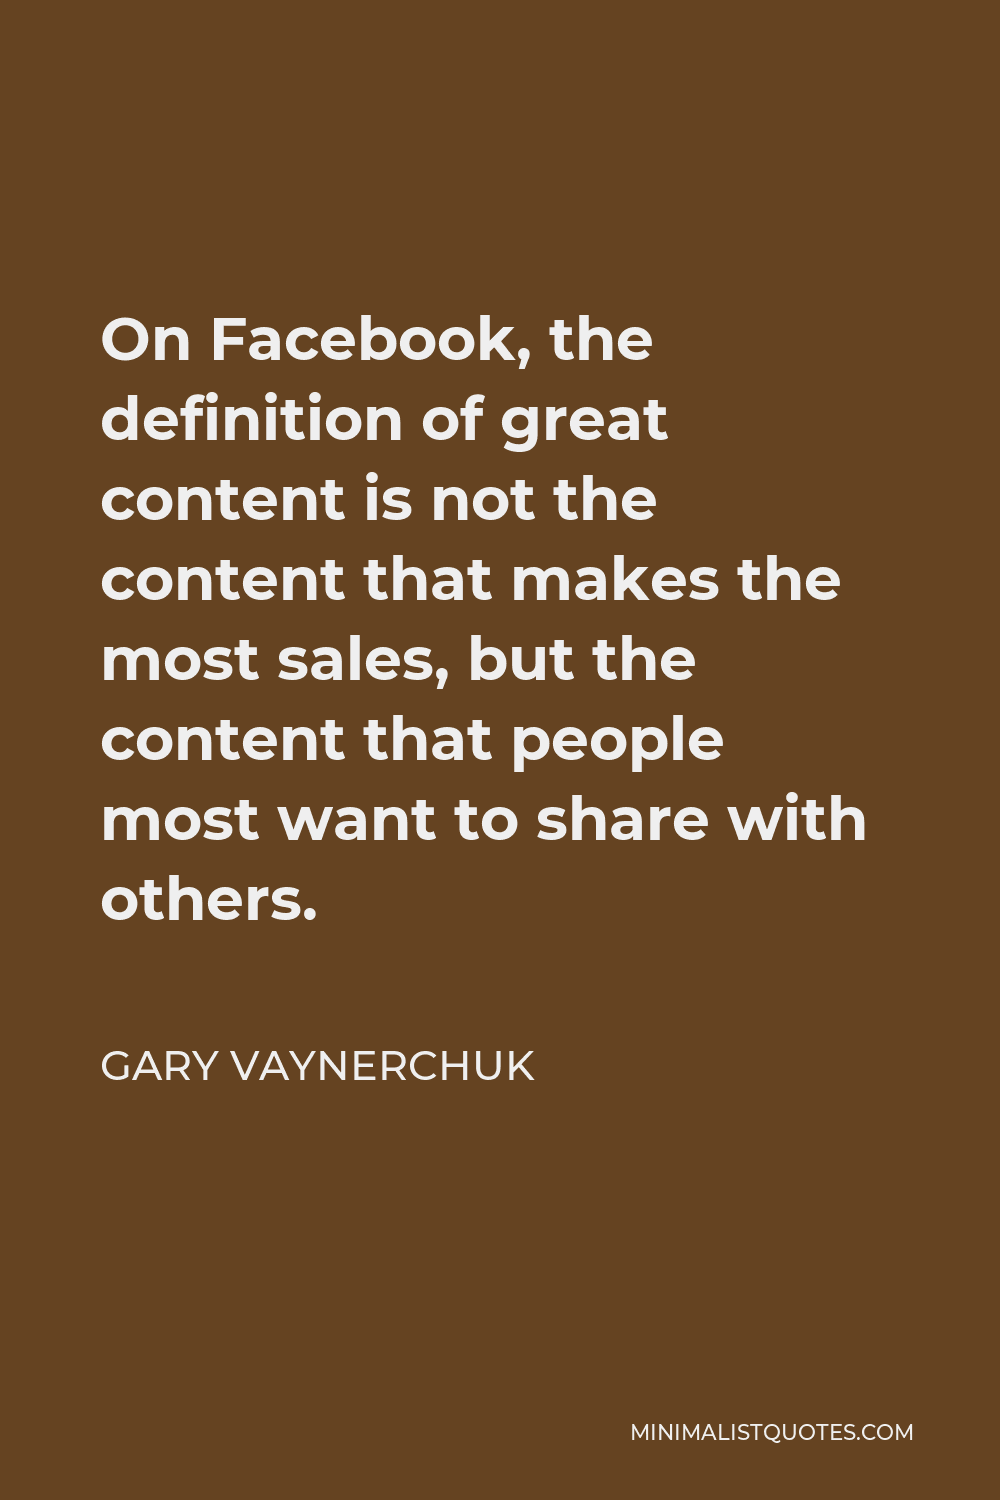 Gary Vaynerchuk Quote - On Facebook, the definition of great content is not the content that makes the most sales, but the content that people most want to share with others.